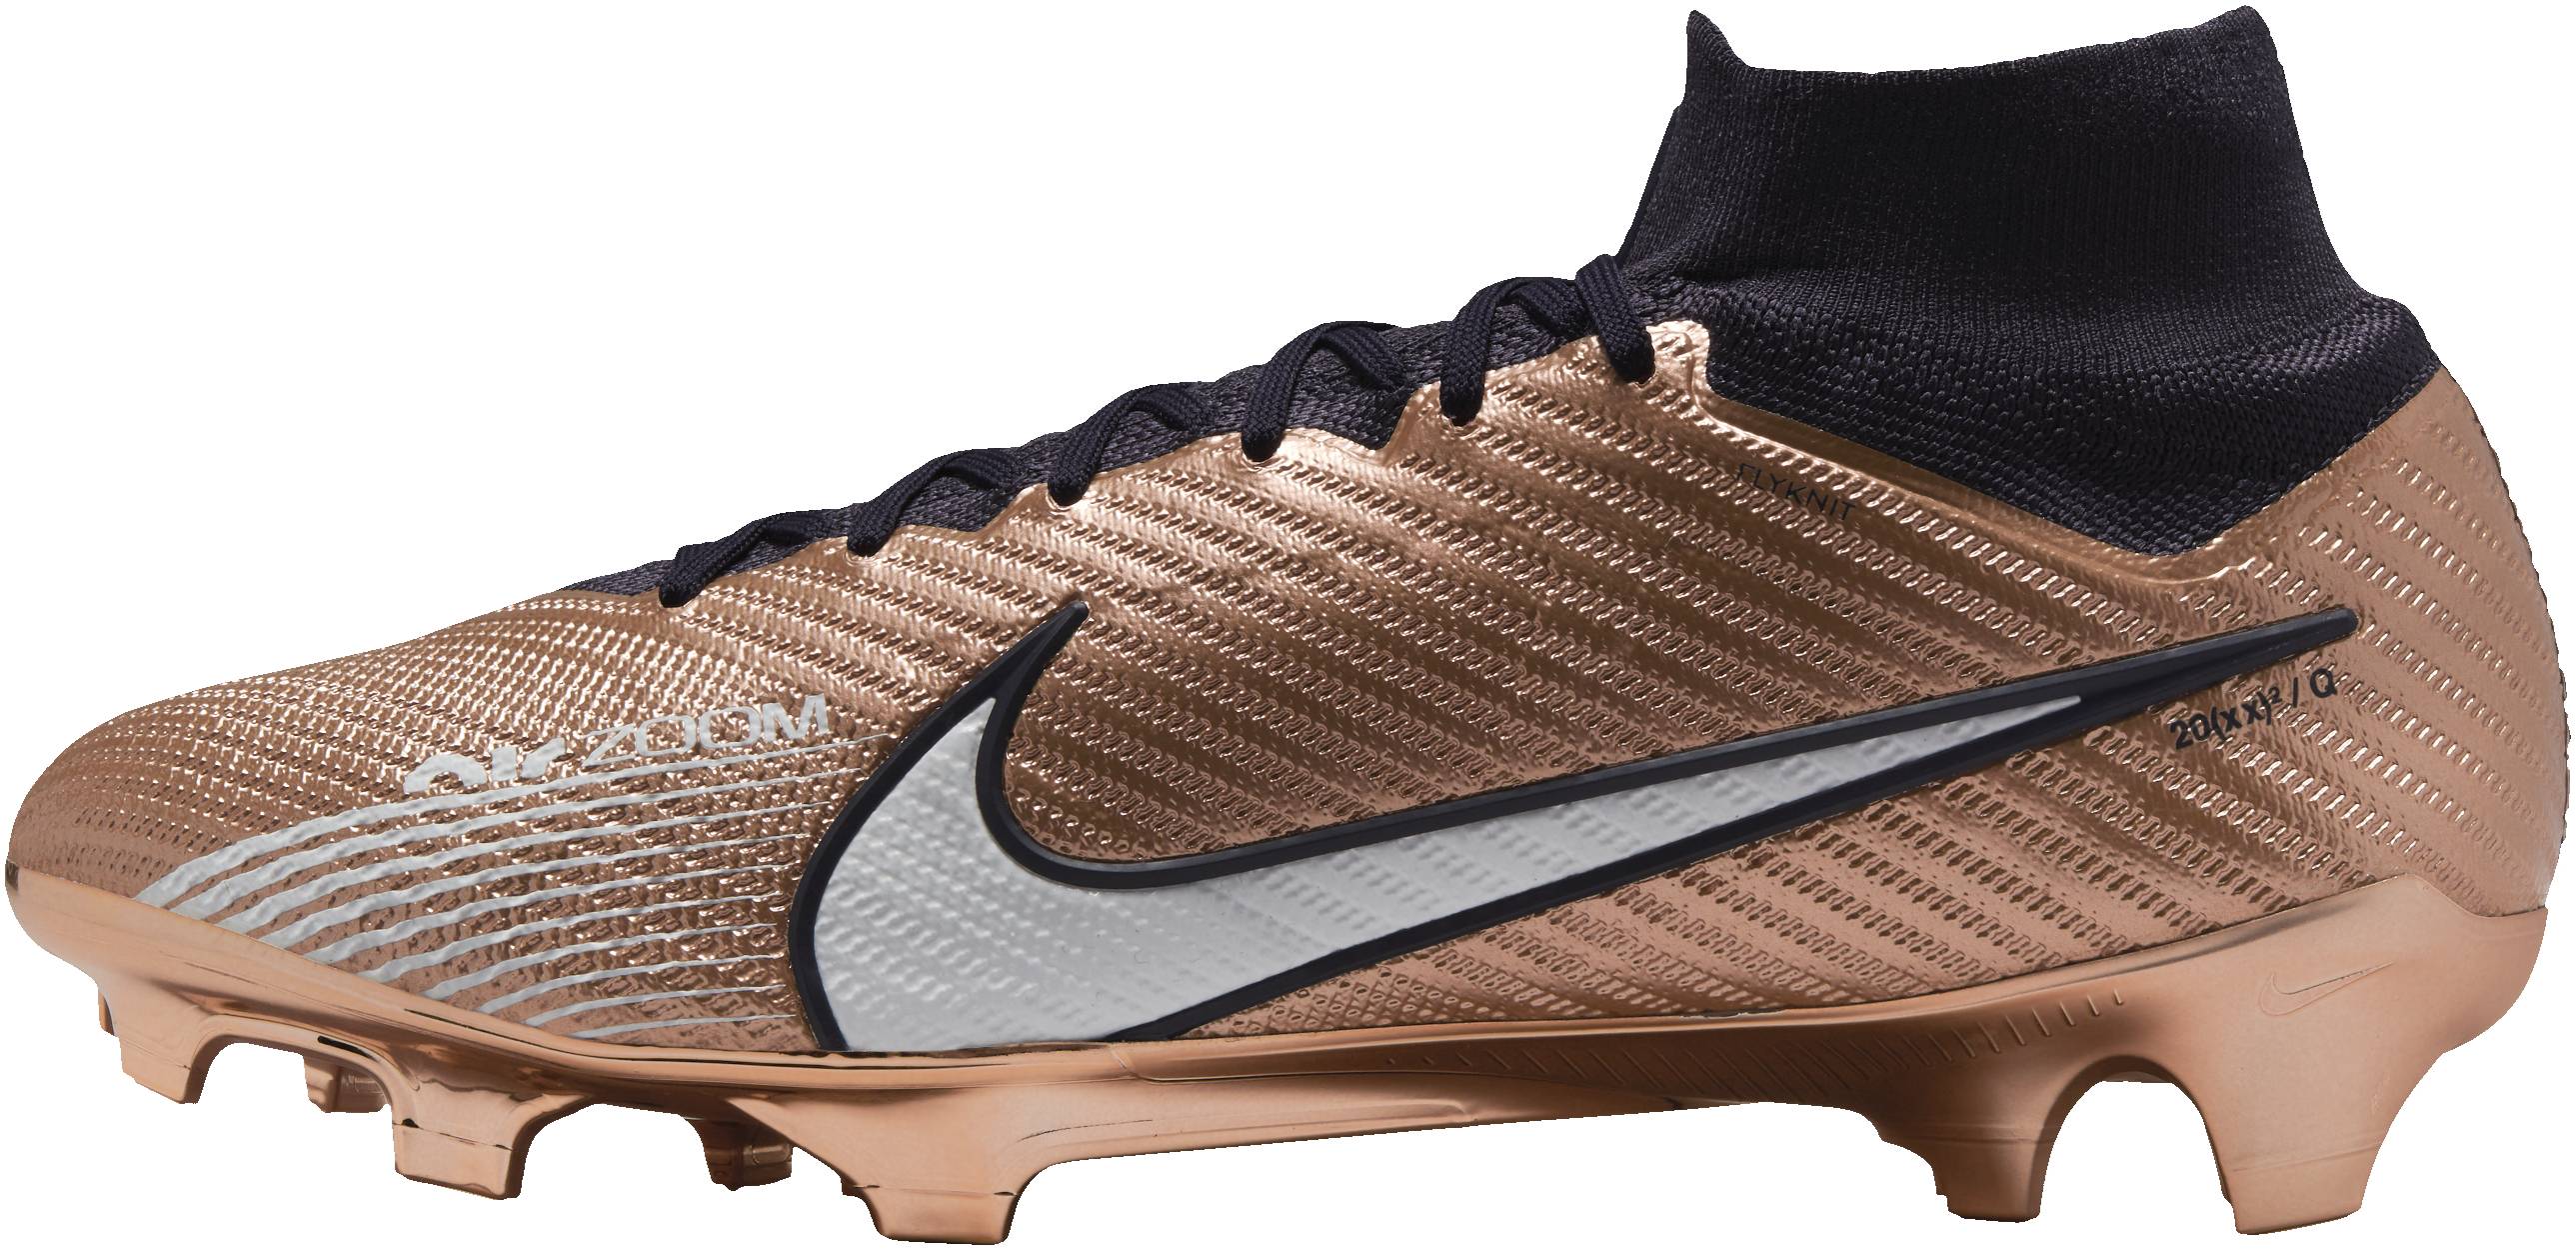 Nike Mercurial Superfly 9 Elite Firm-Ground Soccer Cleats.